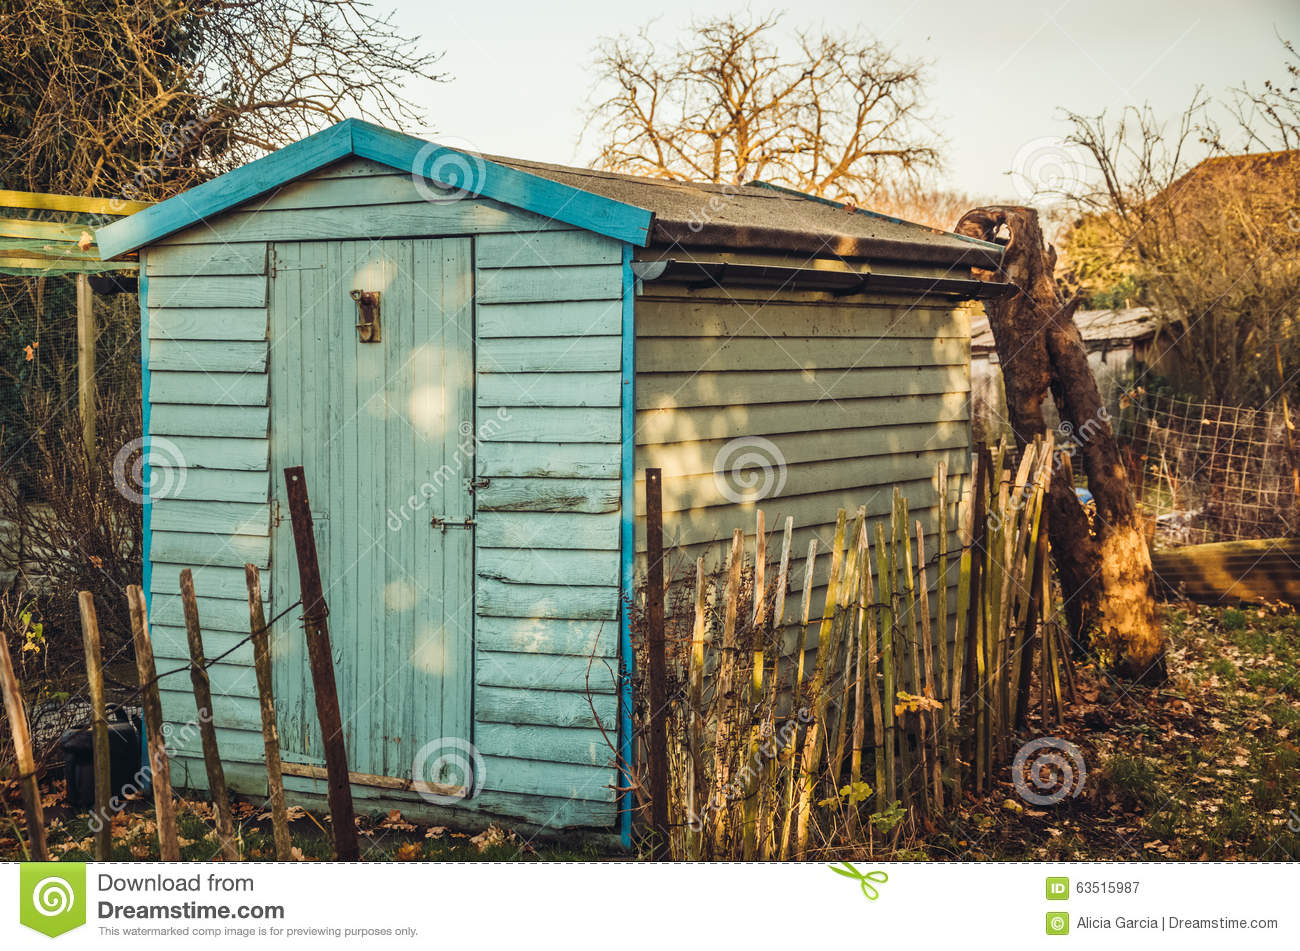 Blue Shed In Allotments Stock Photo   Image  63515987